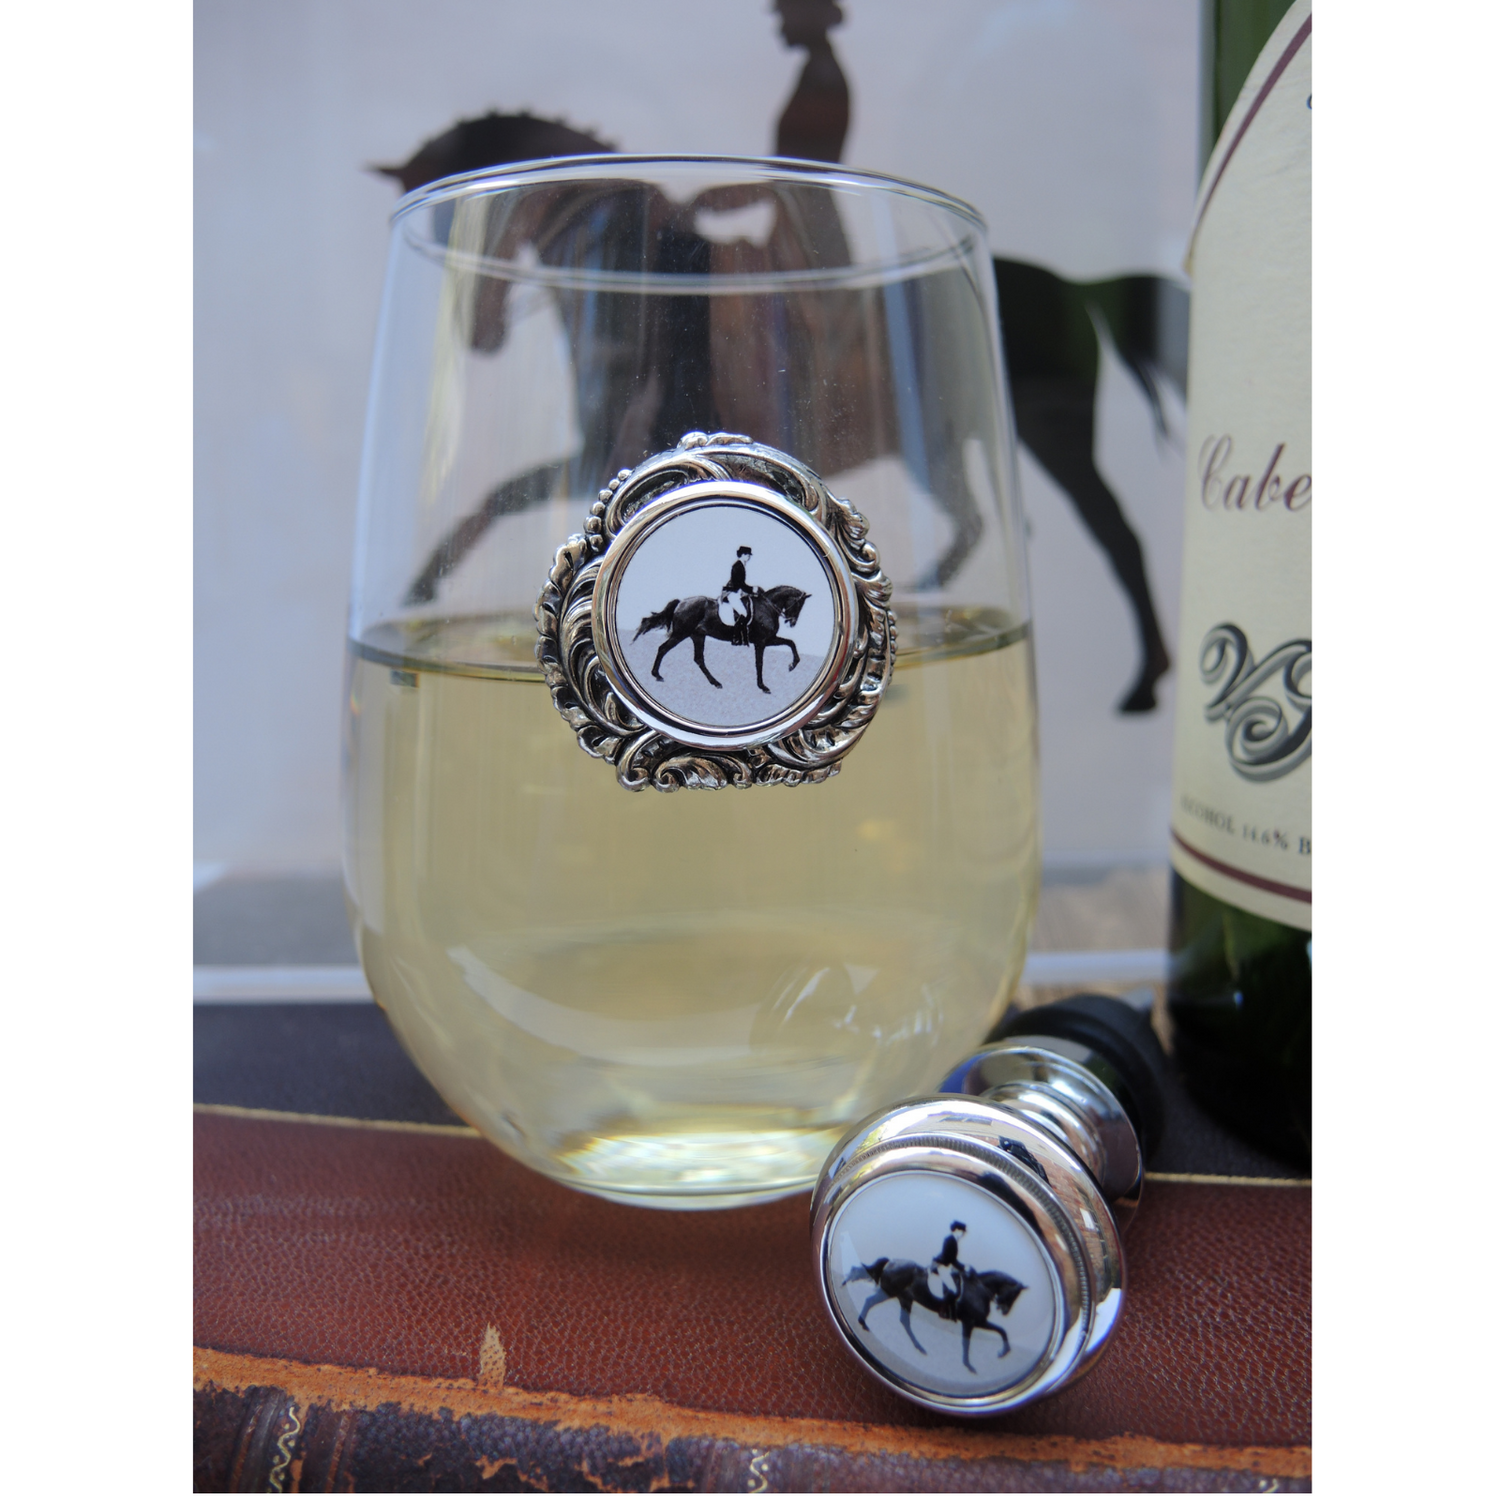 Dressage Gifts for Equestrians